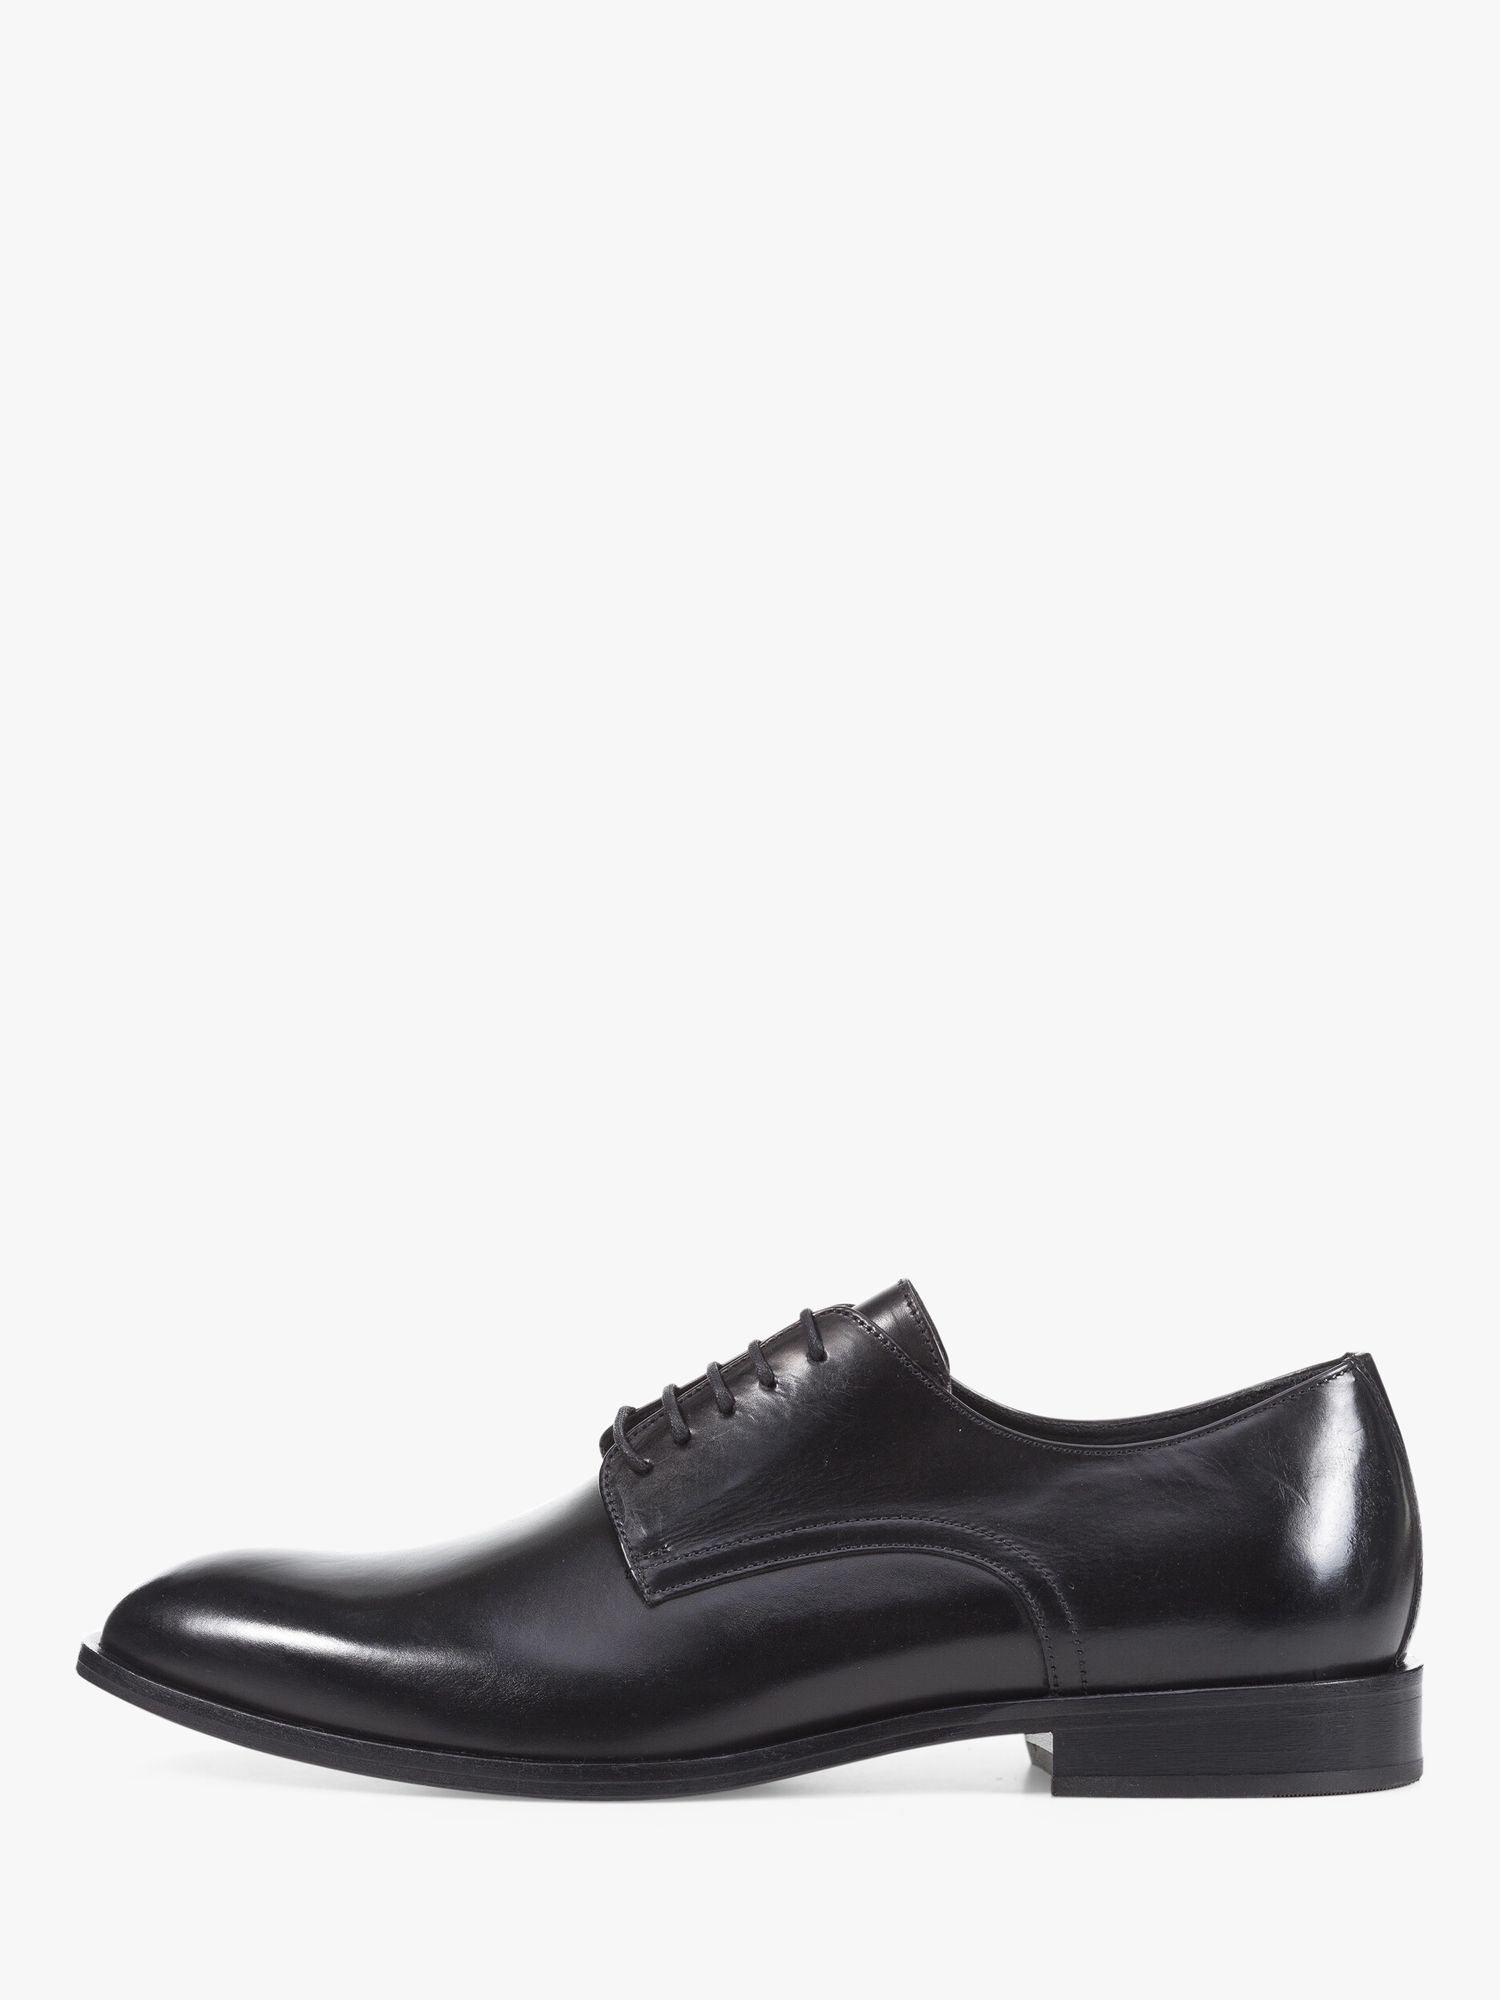 Geox Saymore Leather Derby Shoes, Black at John Lewis & Partners